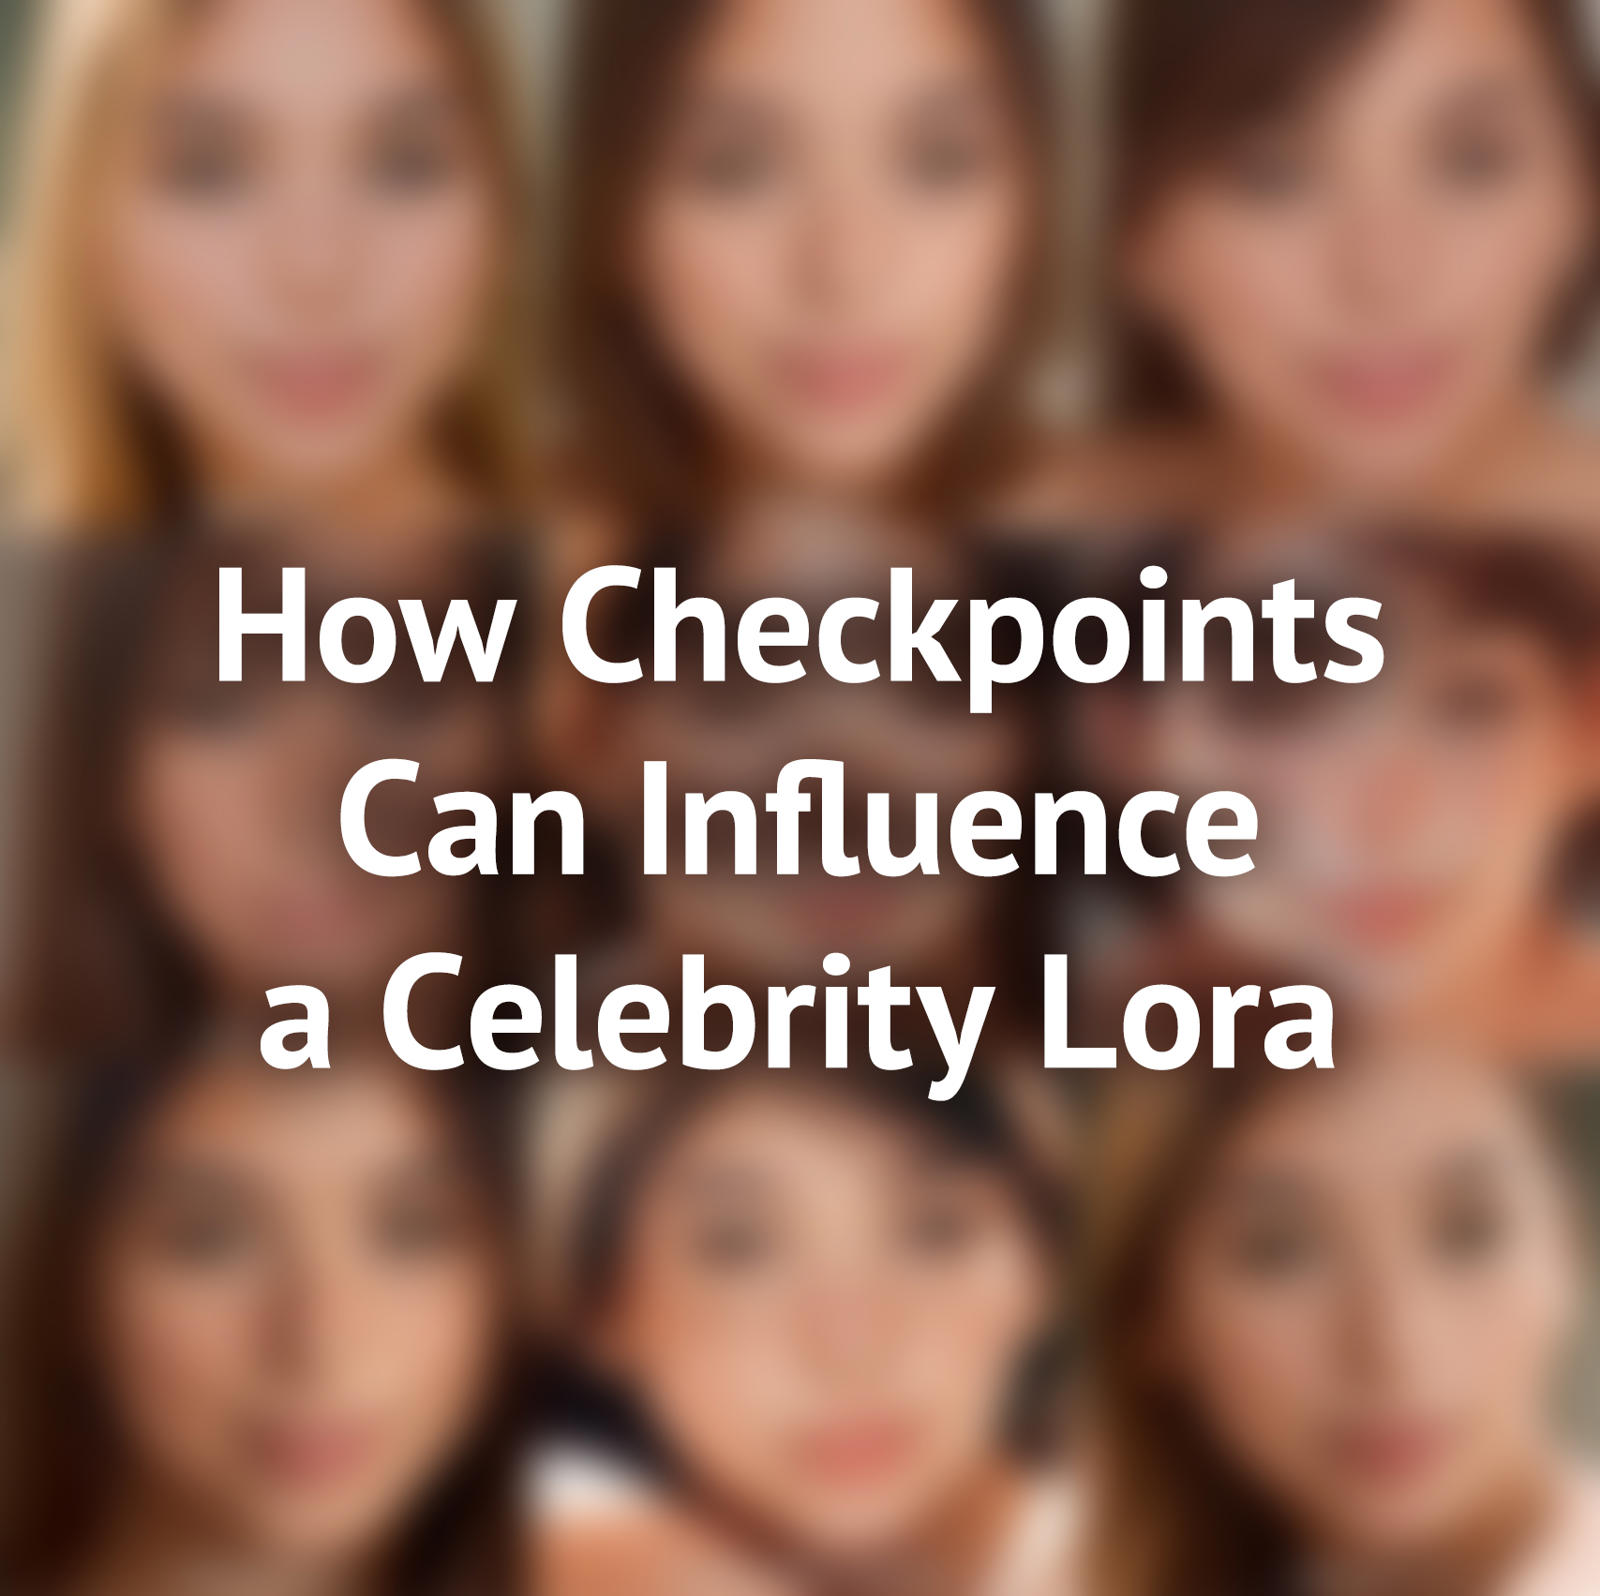 How Checkpoints Can Influence a Celebrity Lora